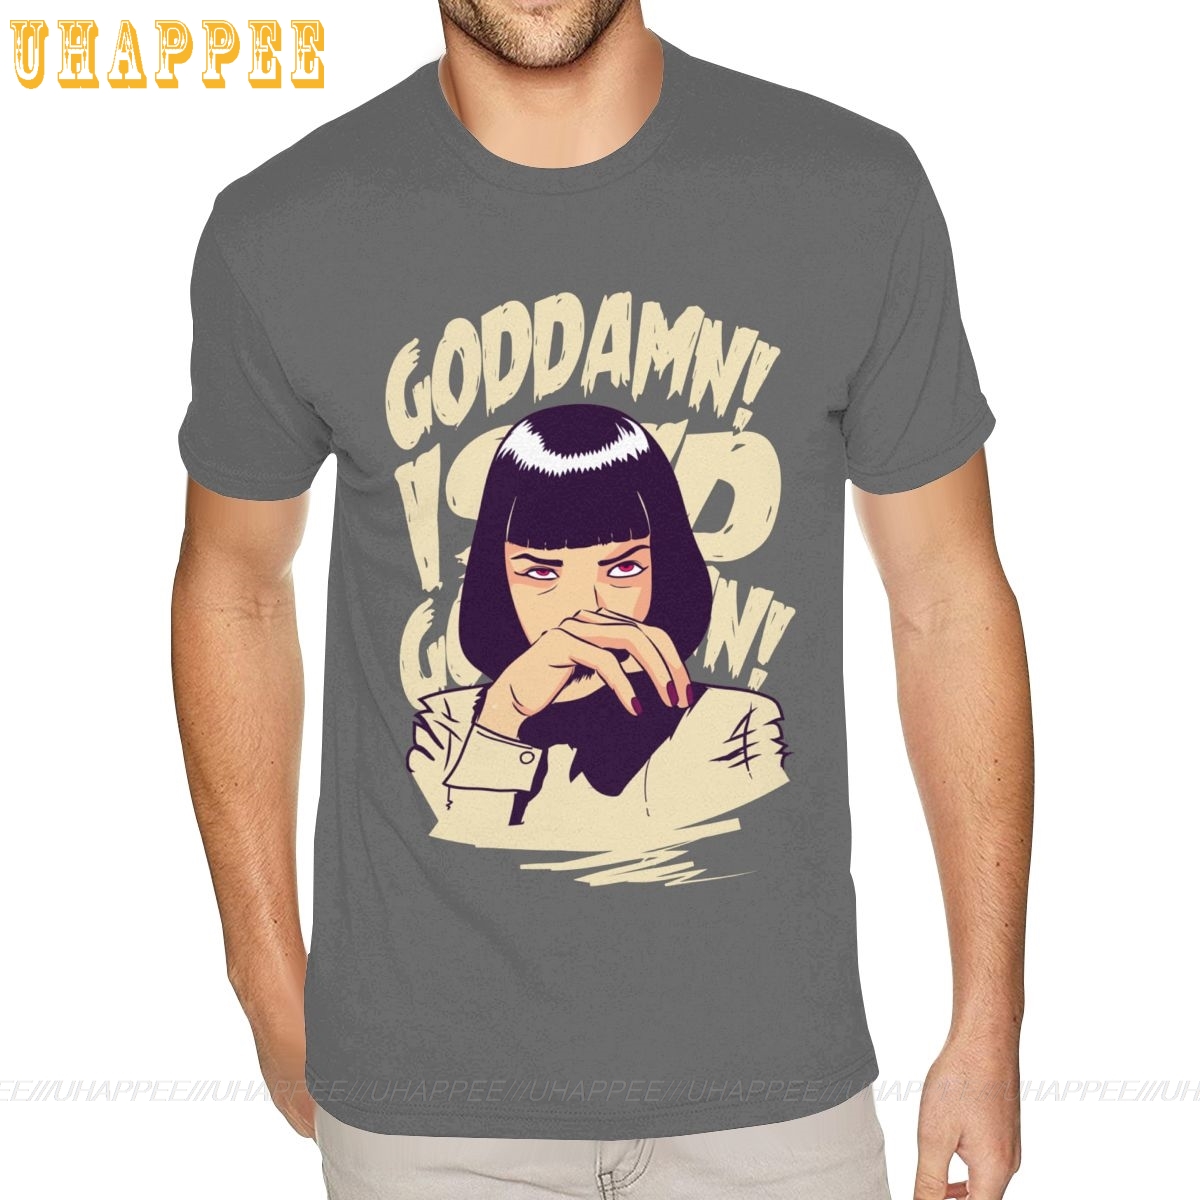 Movie Pulp Fiction Quentin Tarantino Teeshirts Young Guy Fitness Shirt for Men Short Sleeved Brands Designer Unique Apparel